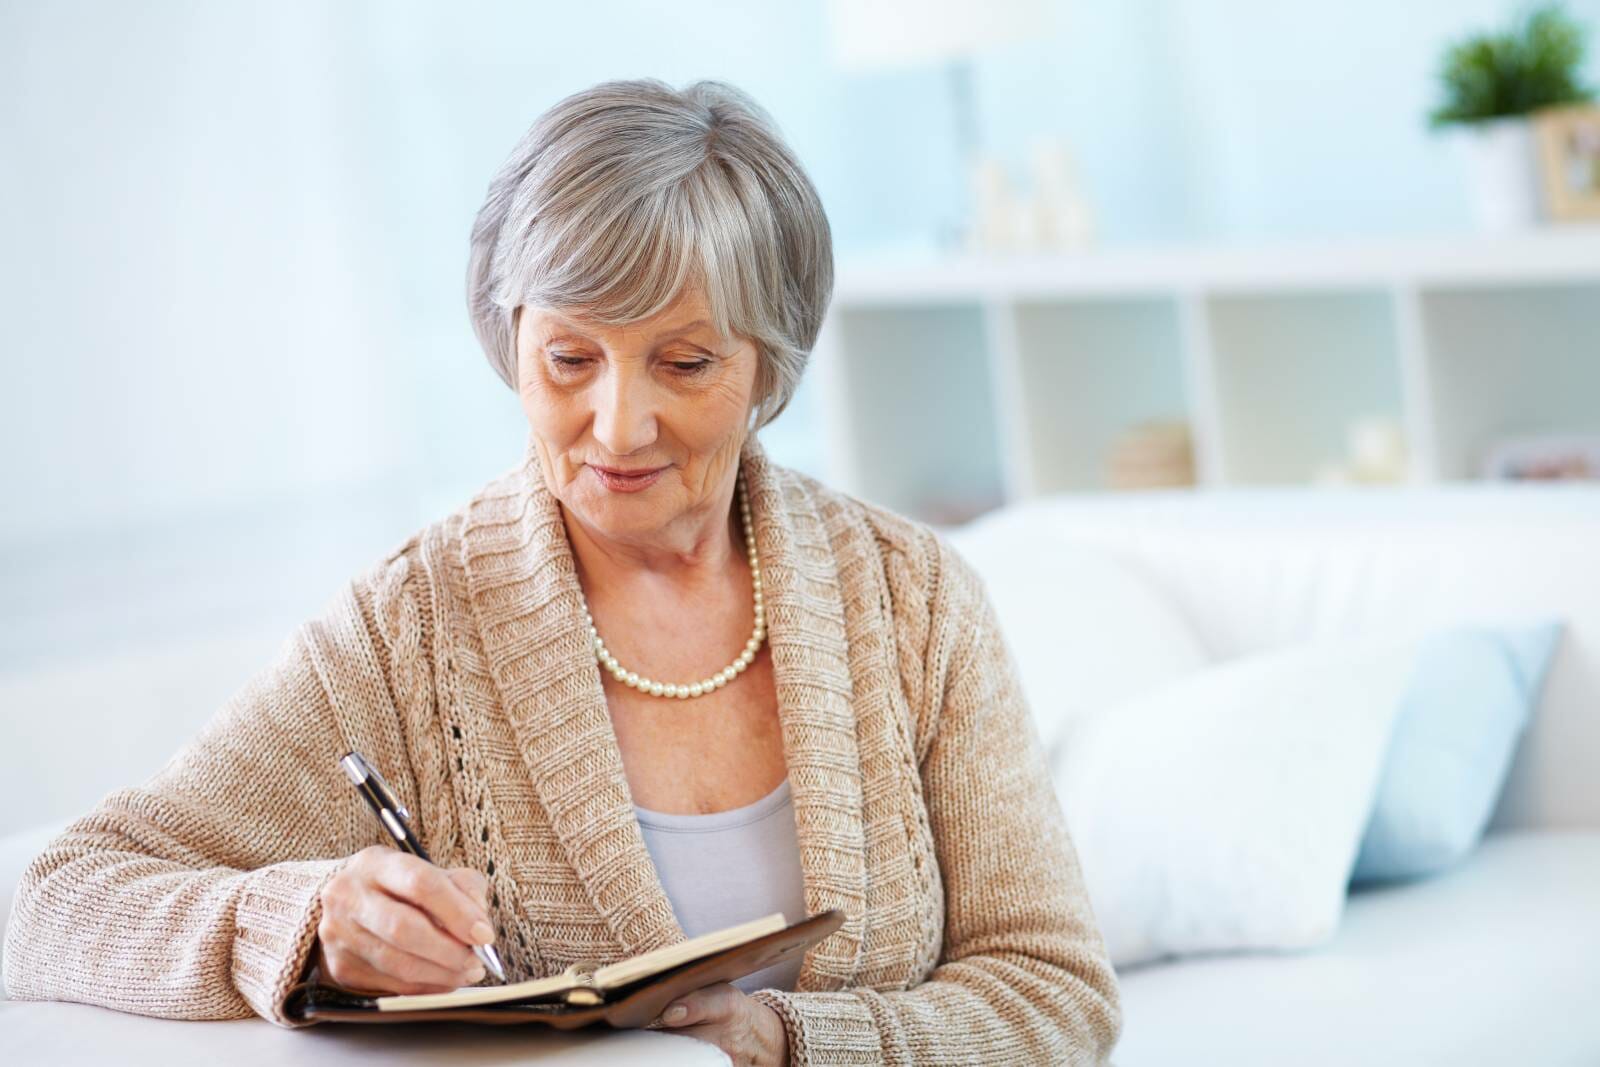 Senior woman with dementia writing in a notebook.